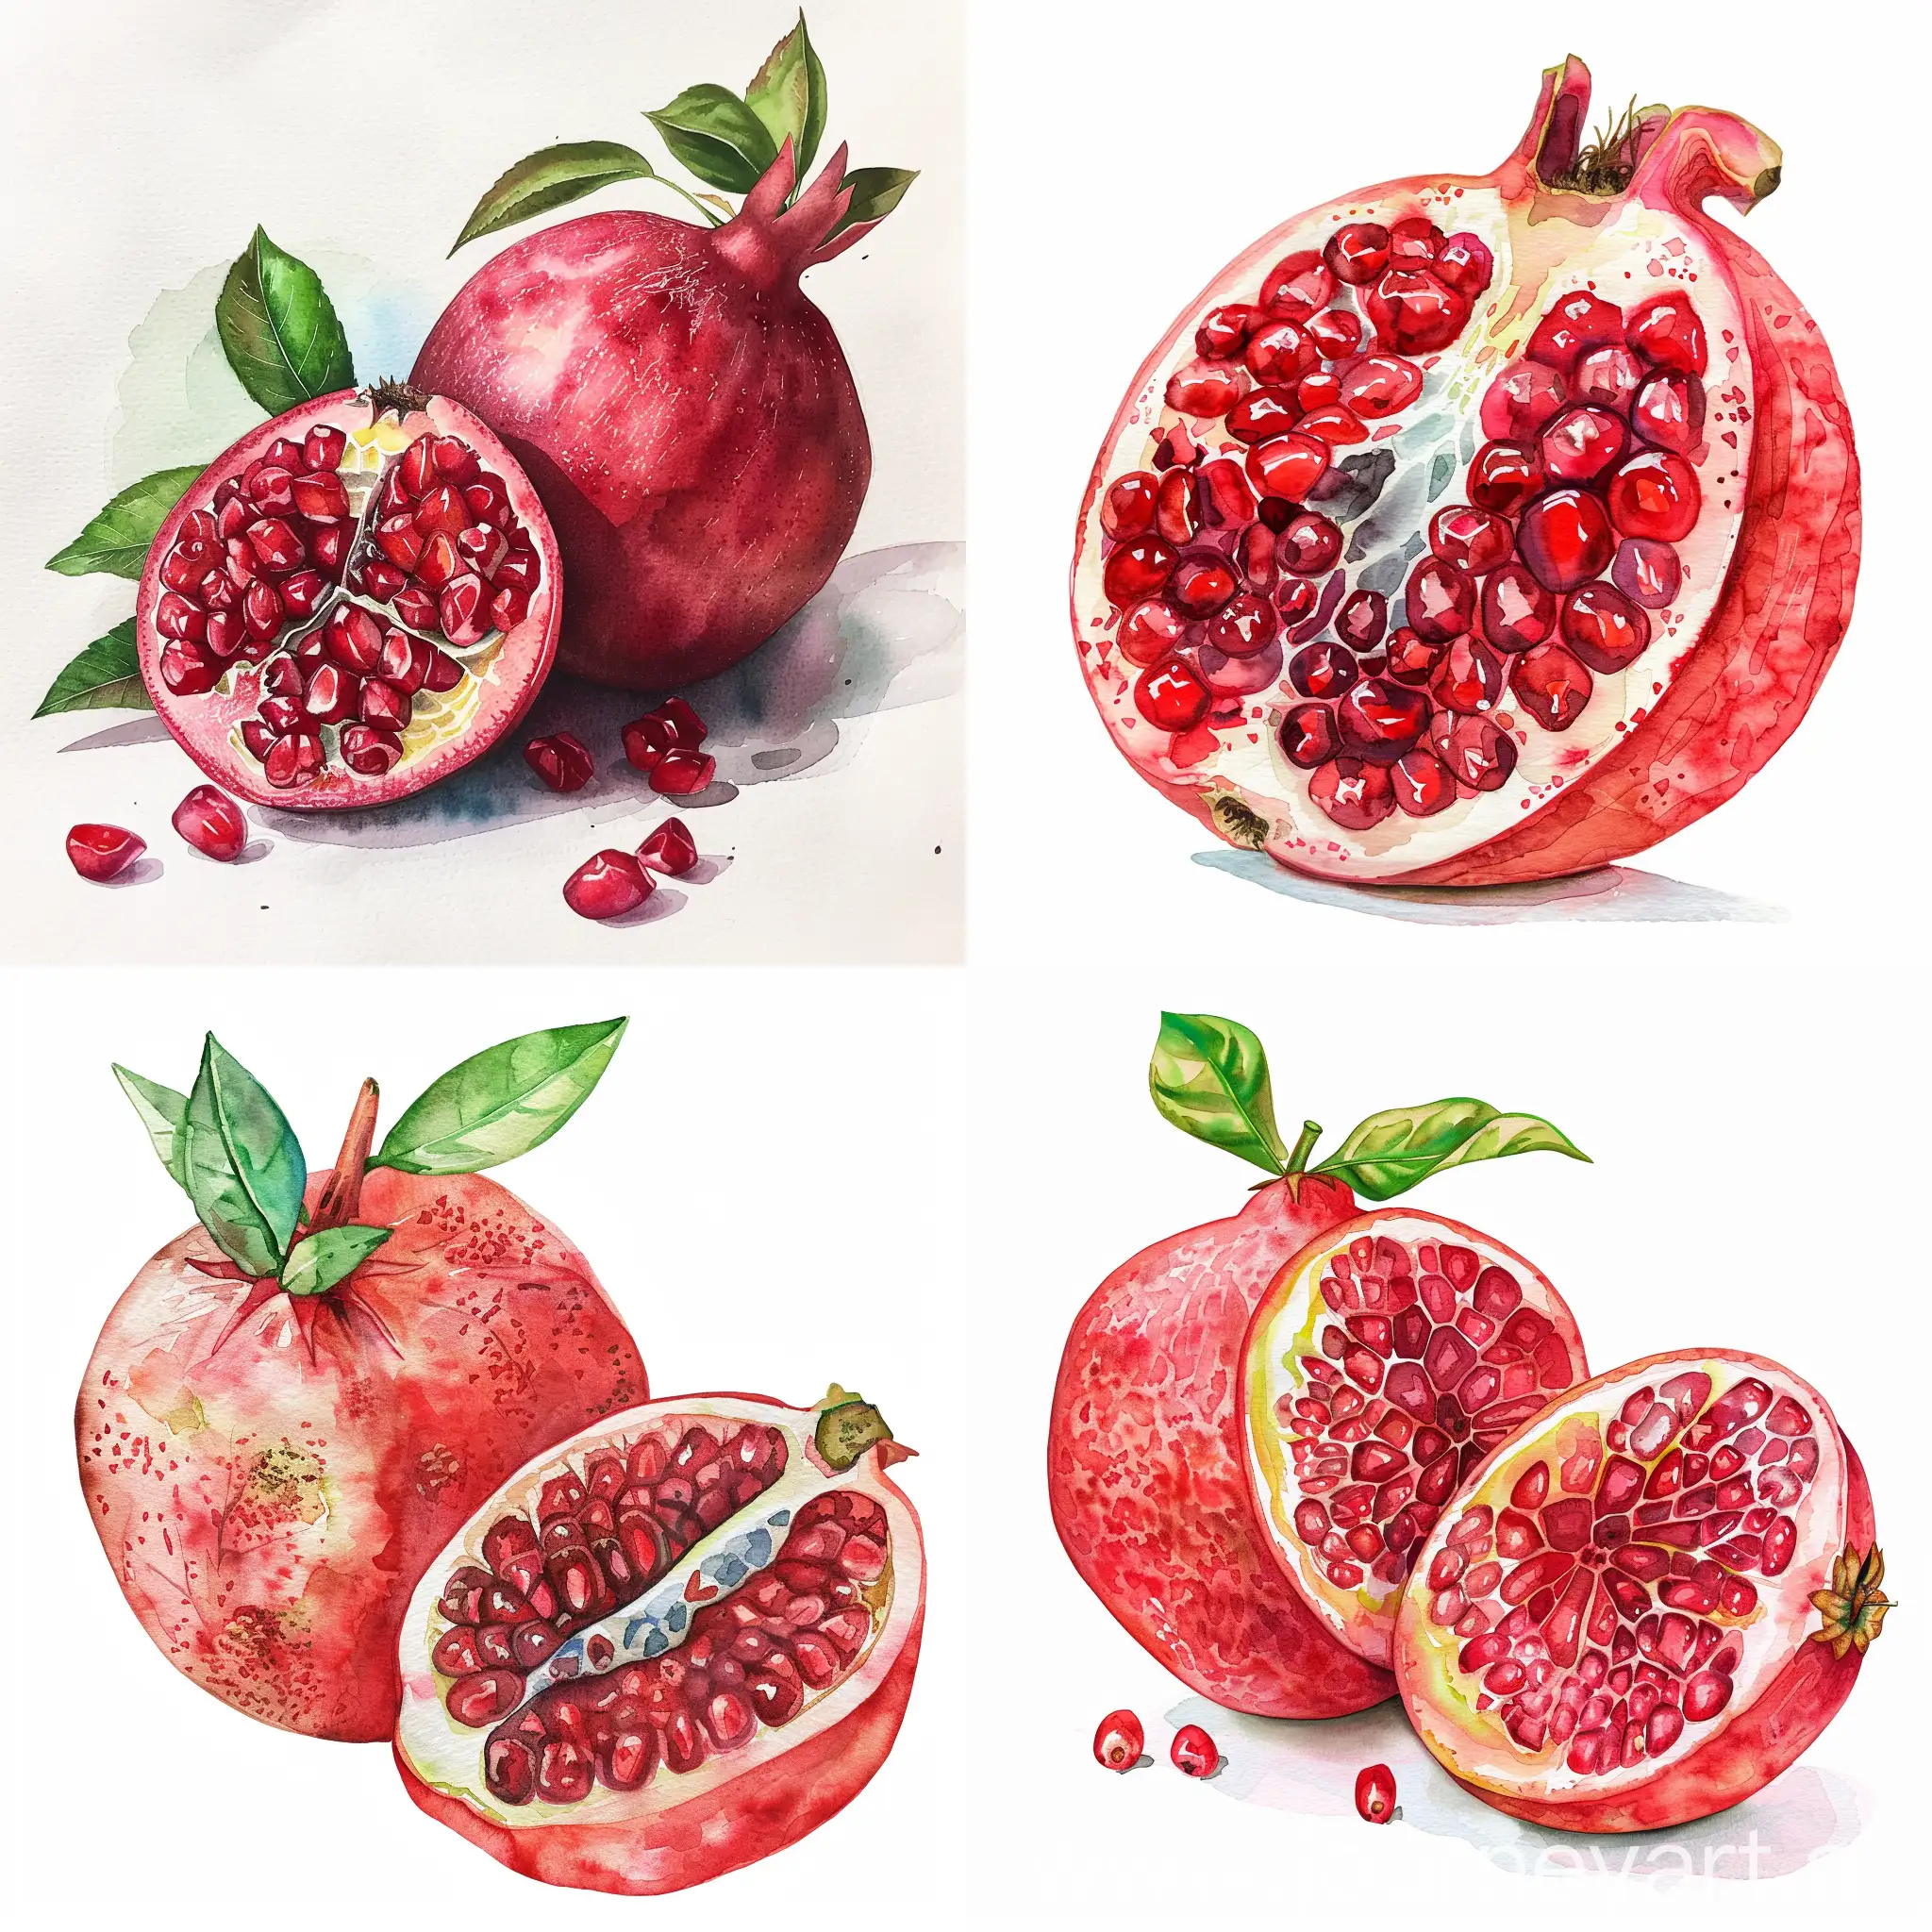 Vibrant-Watercolor-Painting-of-a-Pomegranate-Cut-Open